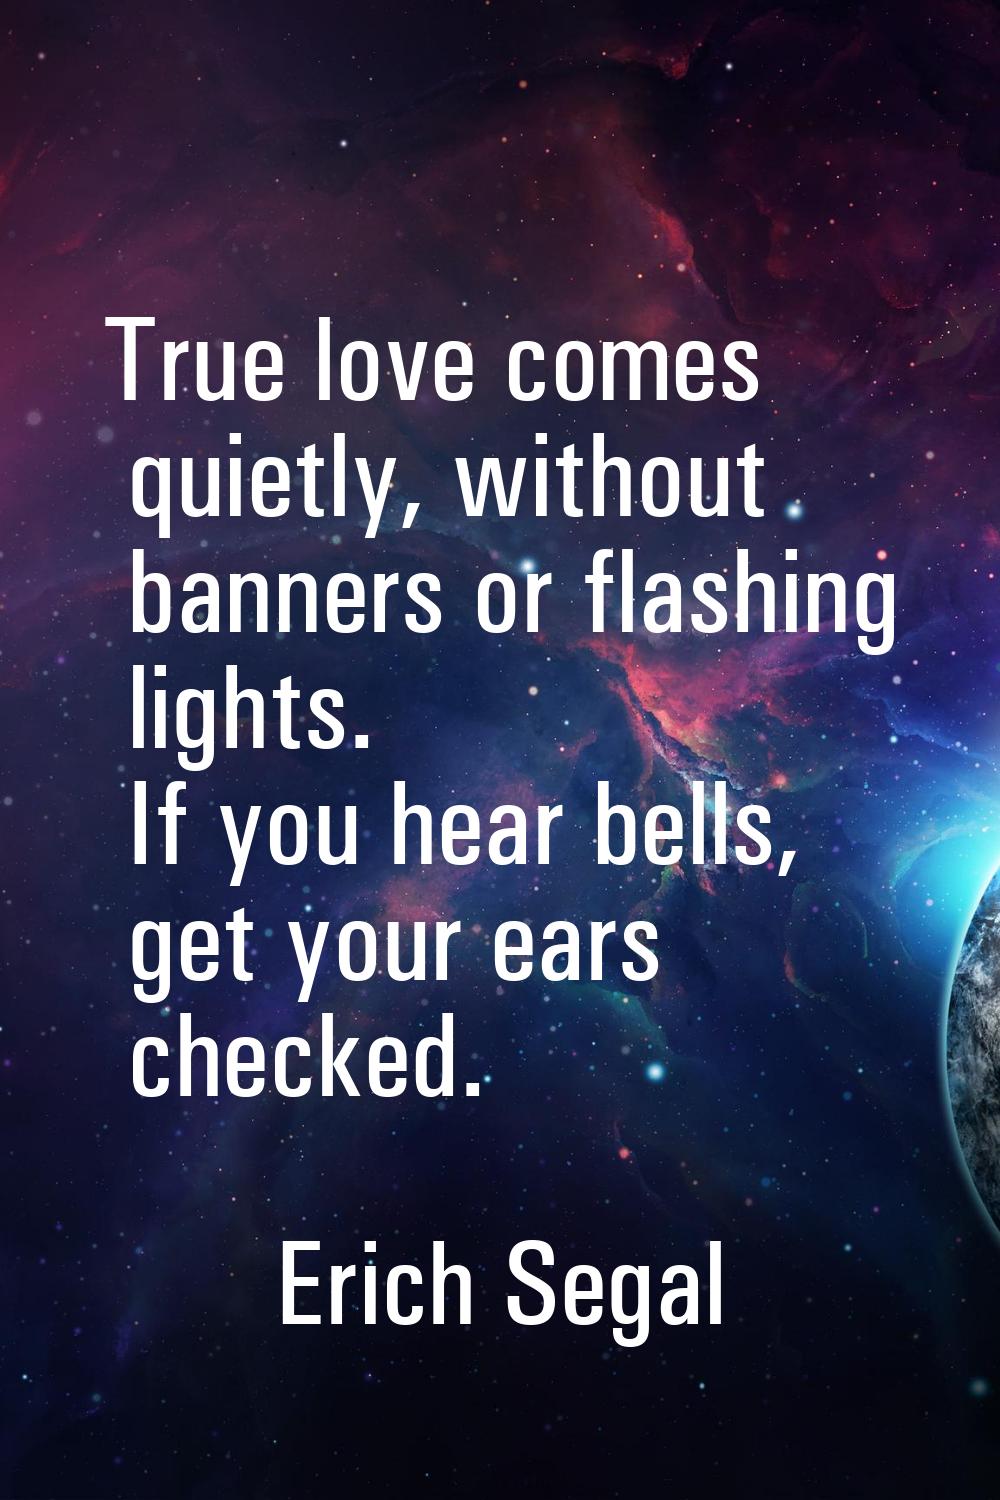 True love comes quietly, without banners or flashing lights. If you hear bells, get your ears check